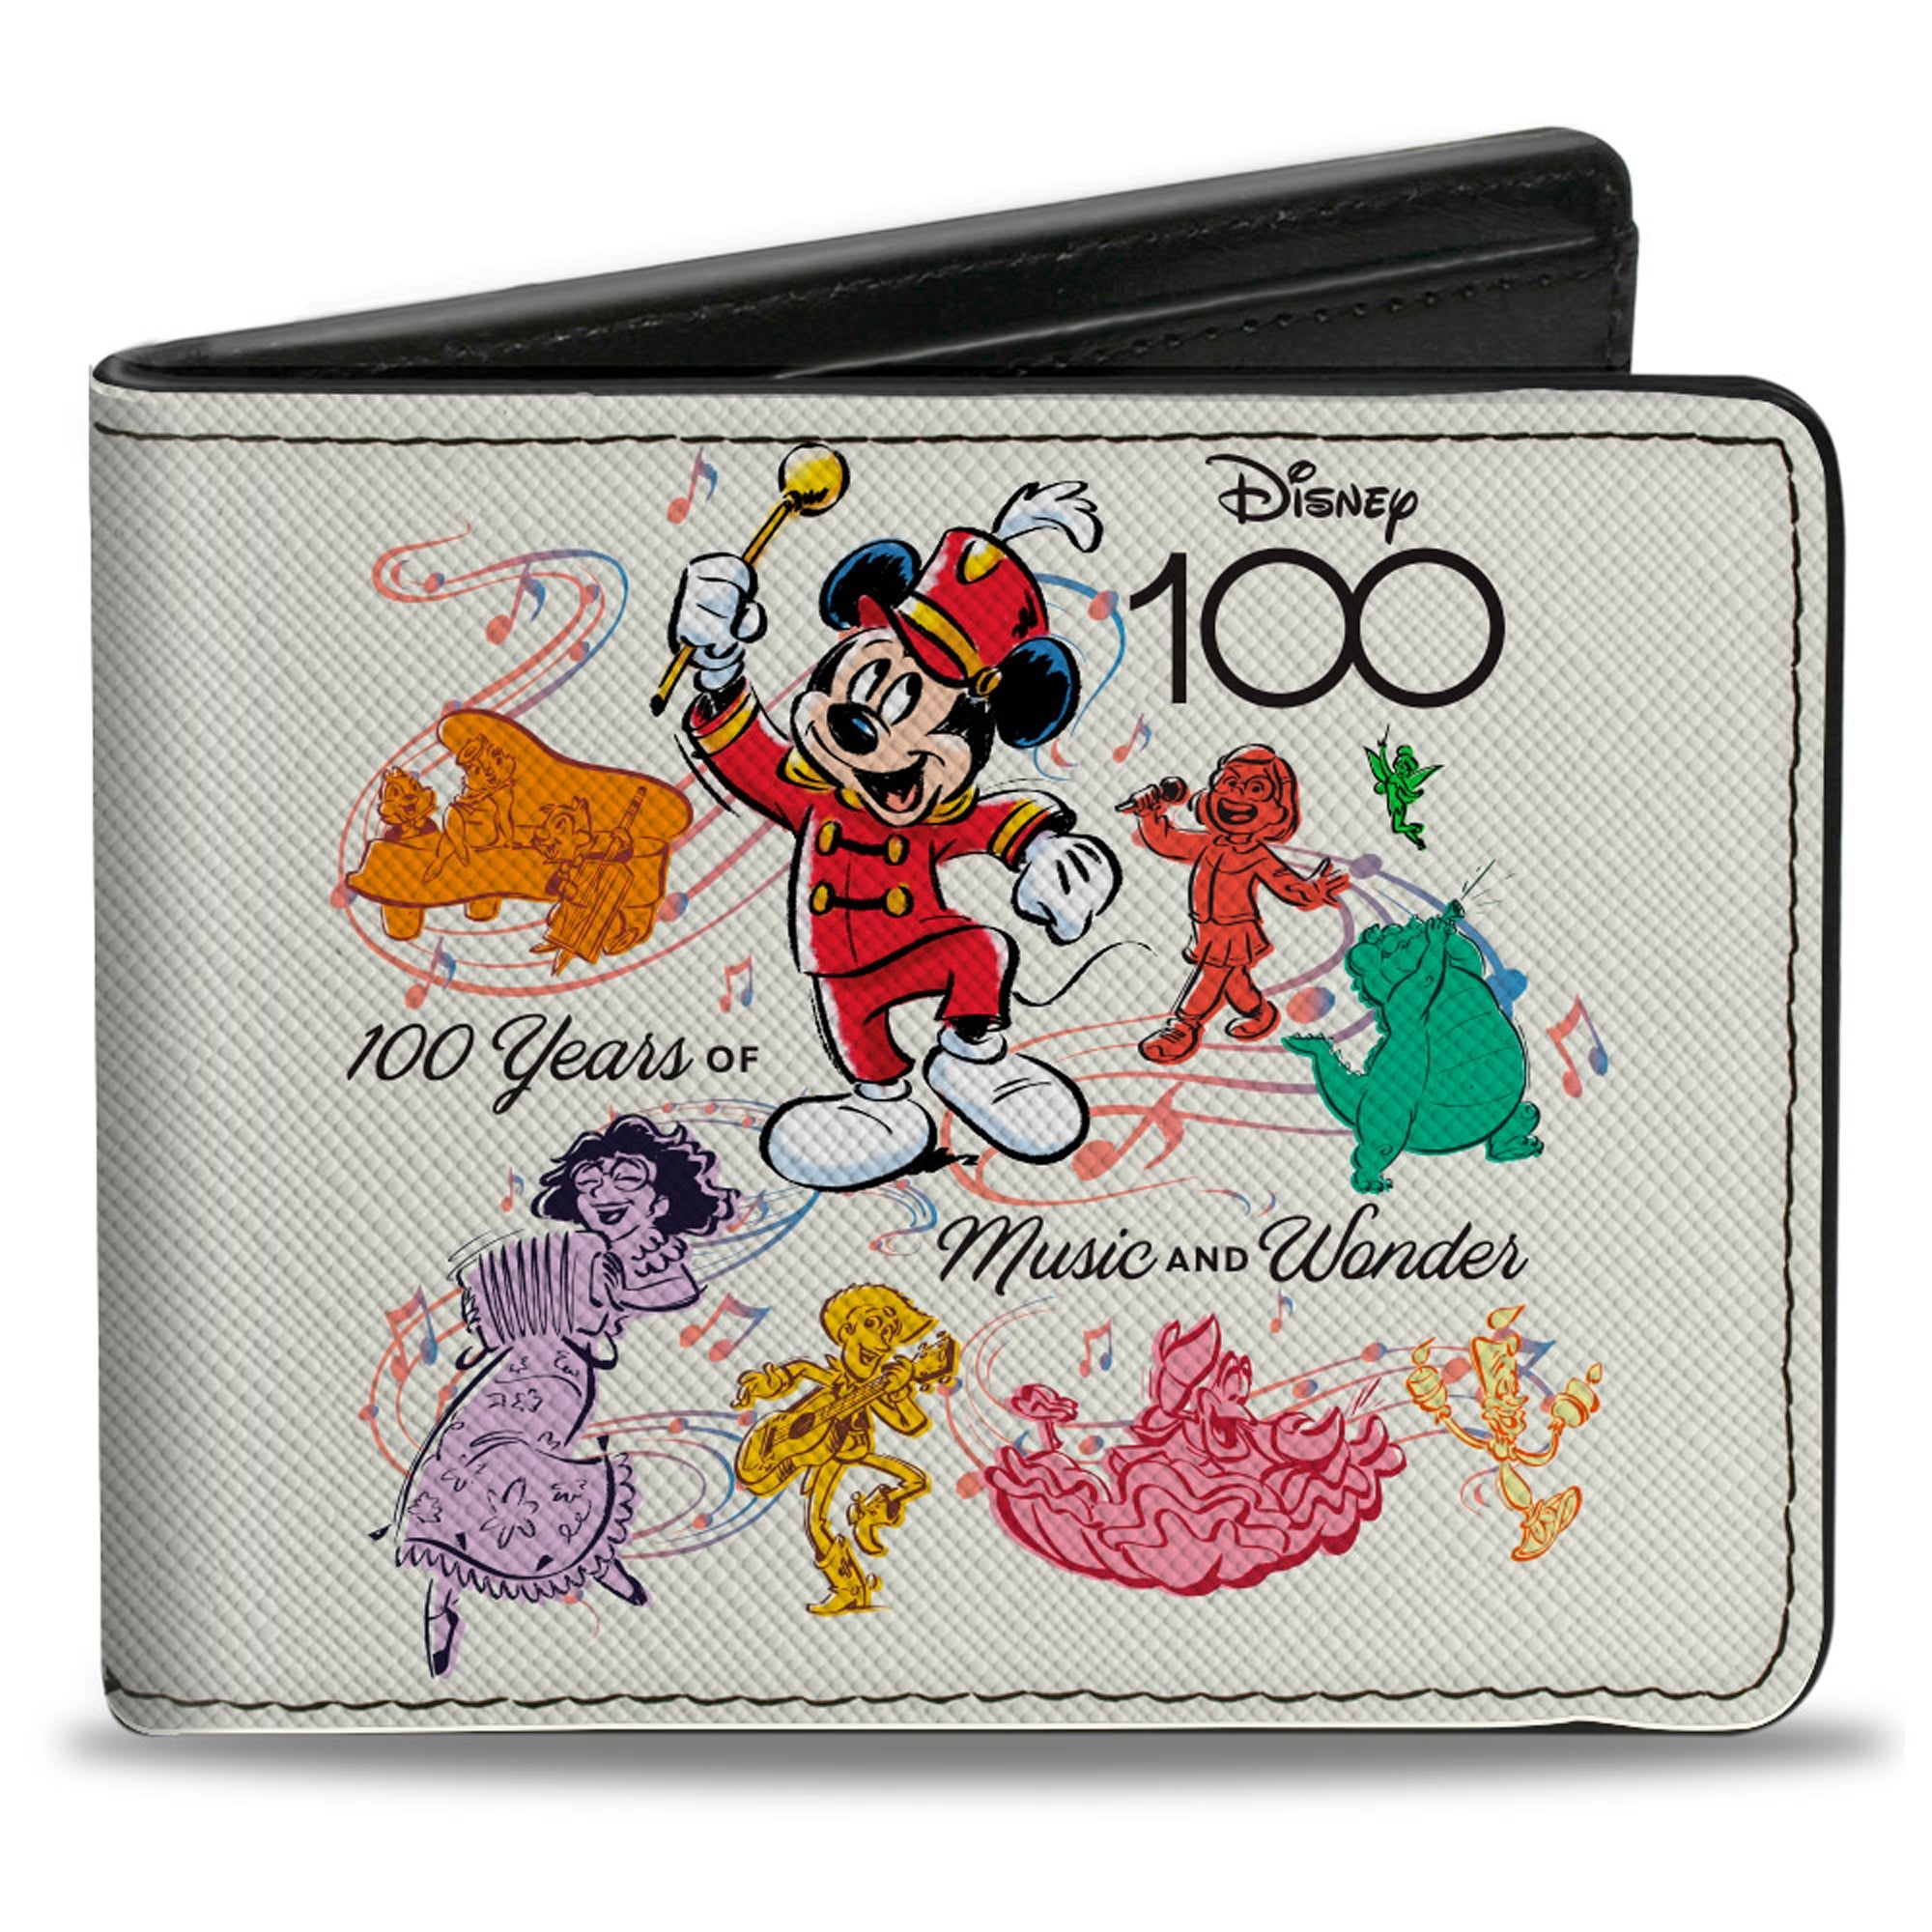 Bi-Fold Wallet - Disney 100 Musical Movie Characters 100 YEARS OF MUSIC AND WONDER White/Multi Color